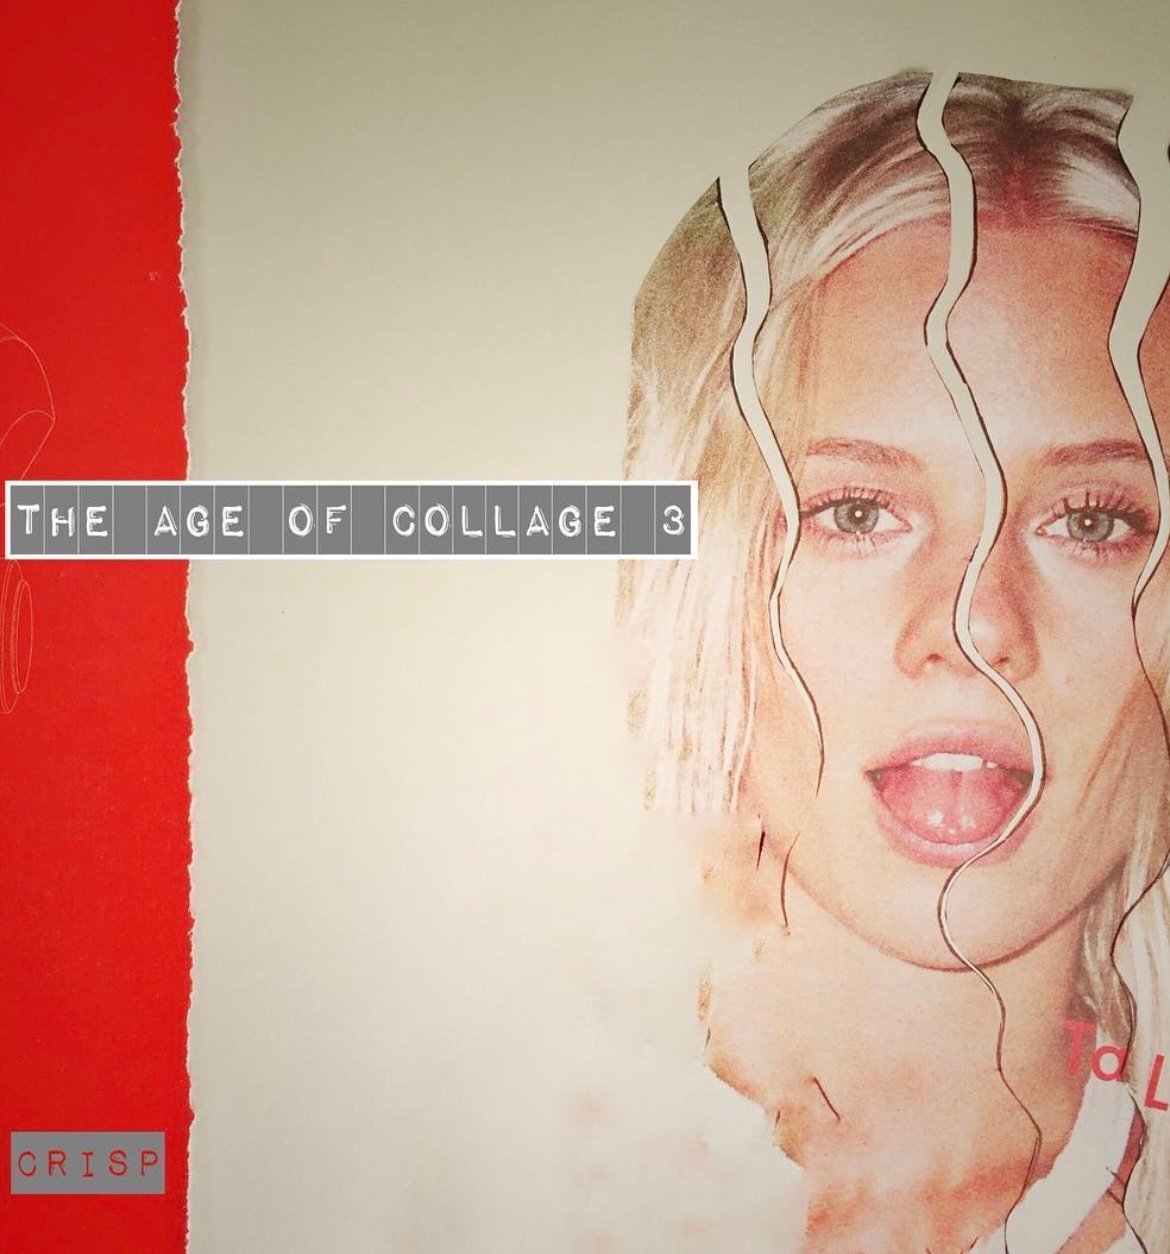 The Age of collage #3